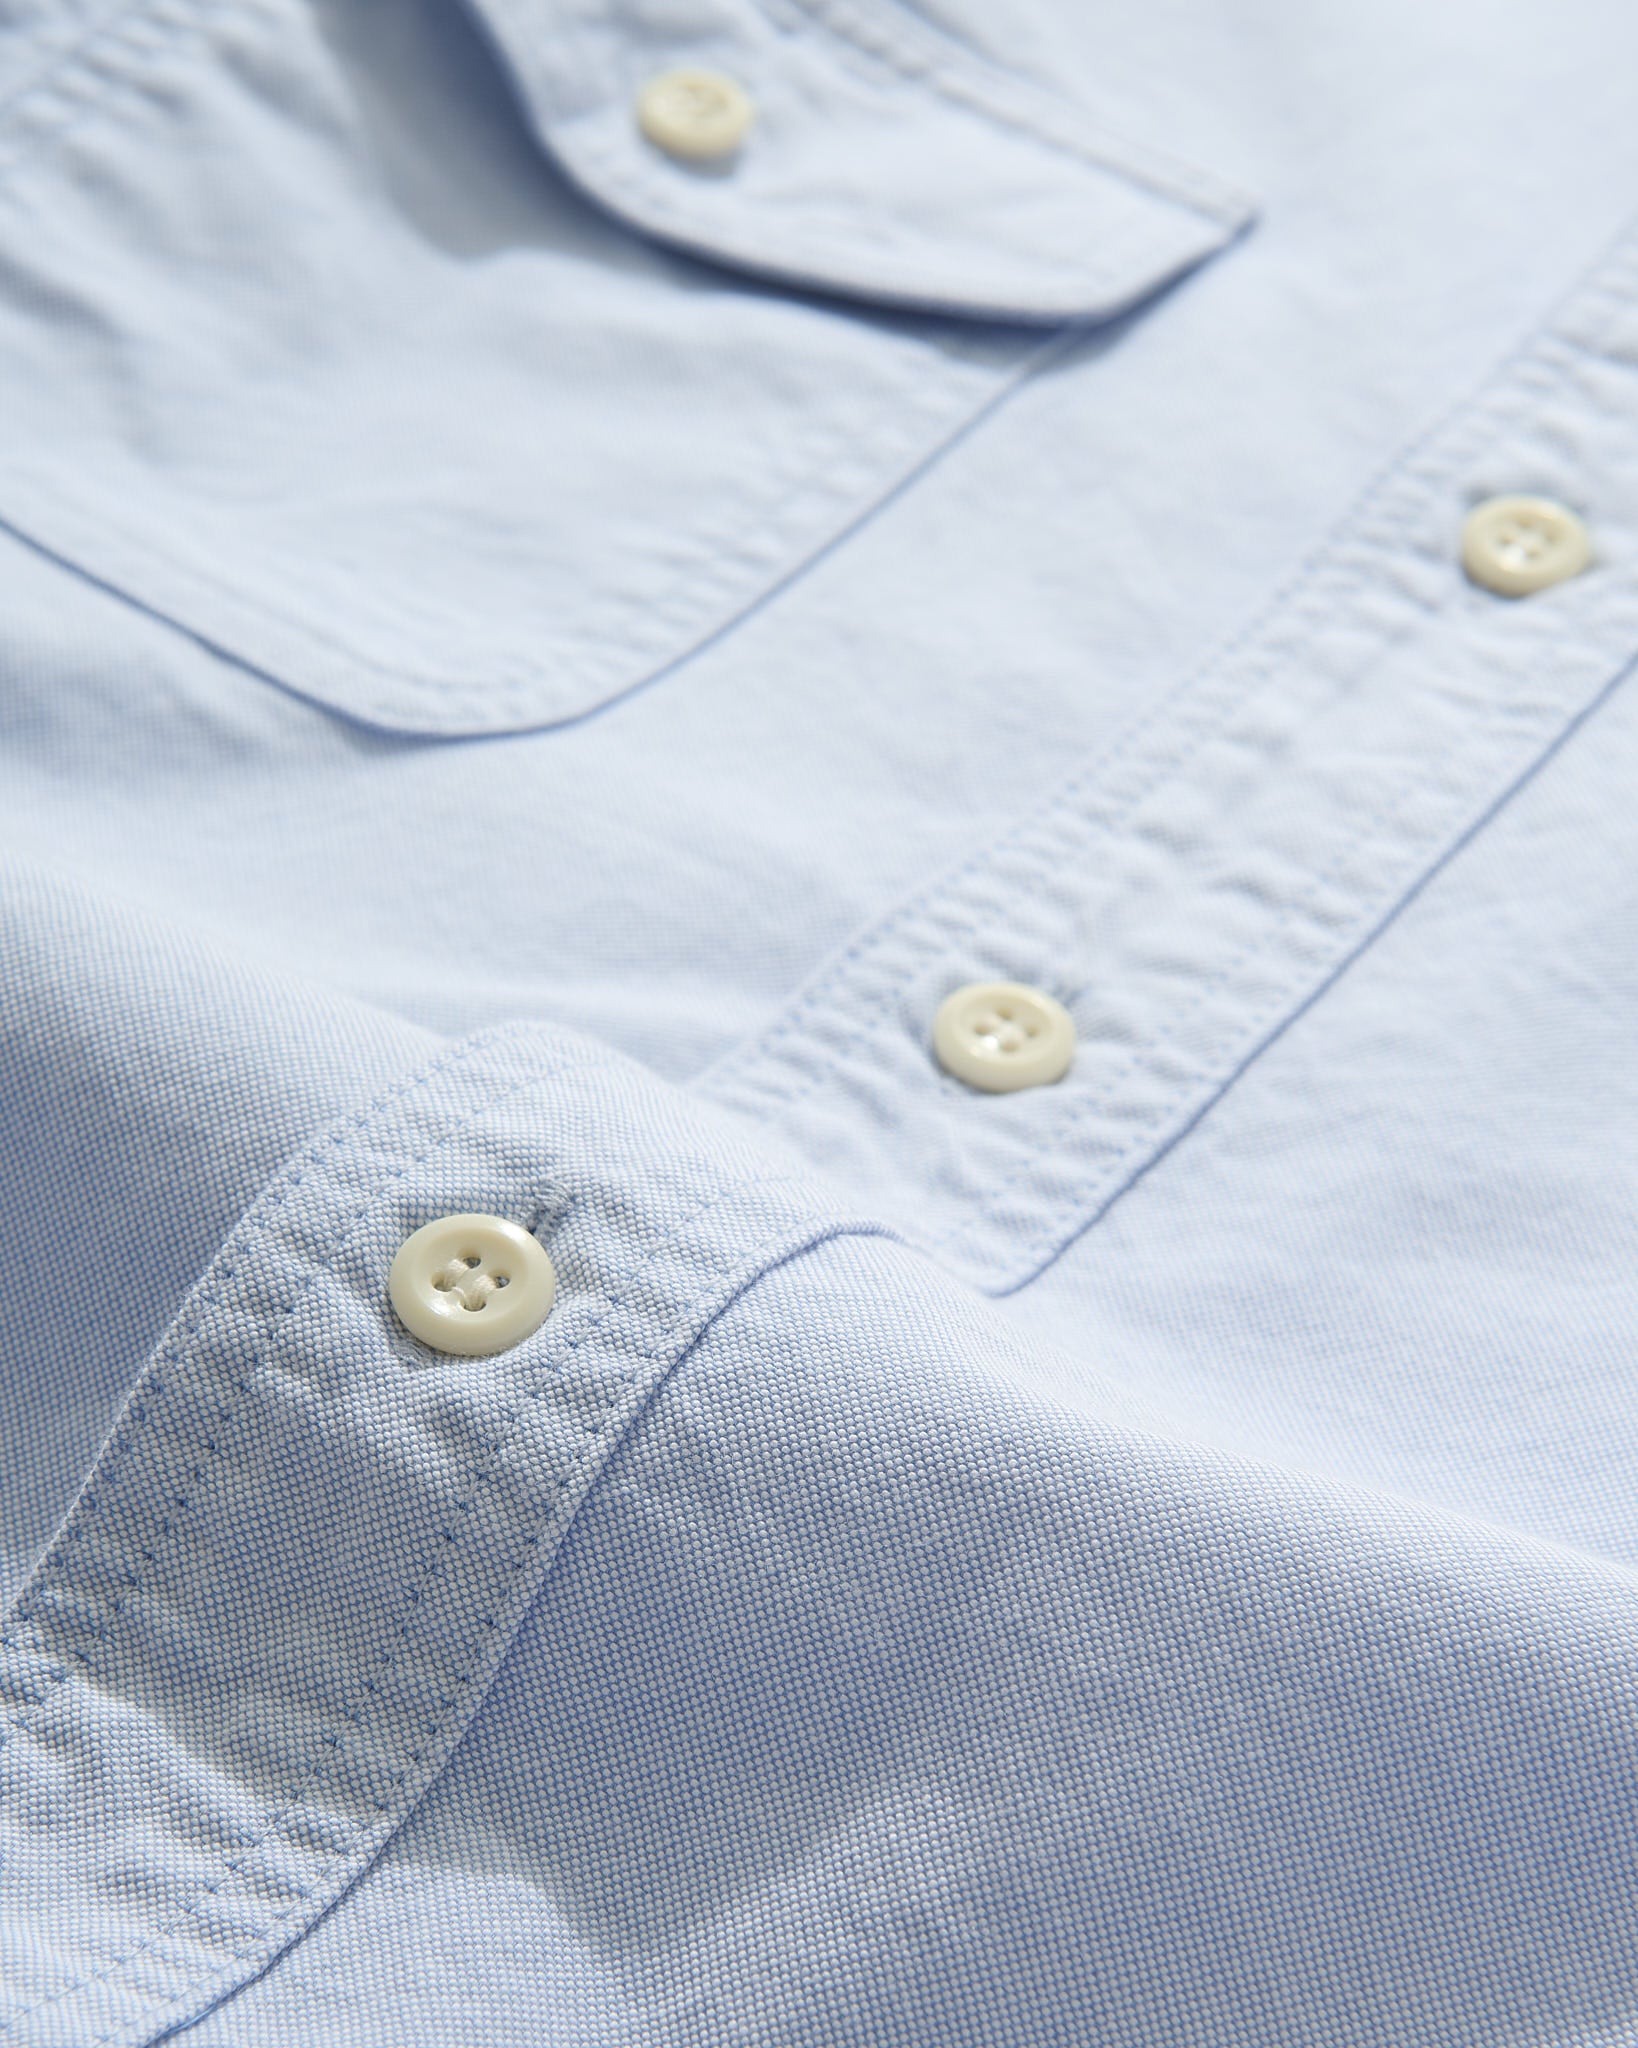 "R" Shirt in New Haven Blue Oxford